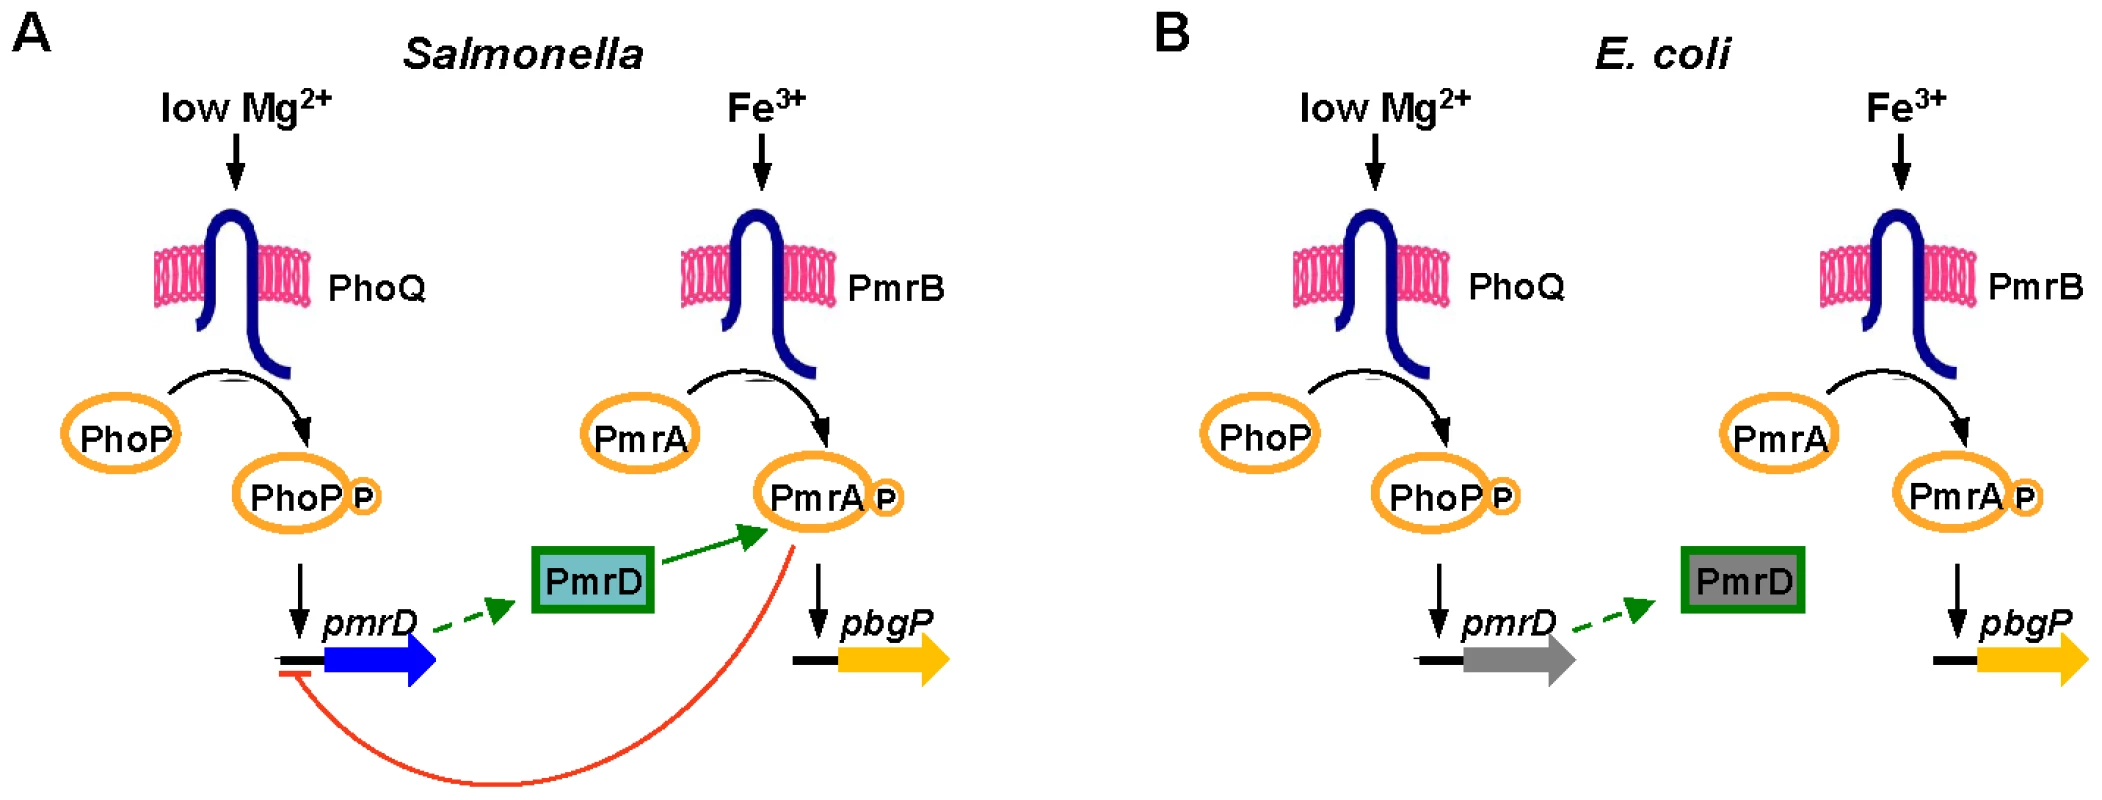 Model of the interactions between the PhoP/PhoQ and PmrA/PmrB two-component systems in <i>Salmonella</i> and <i>E. coli</i>.